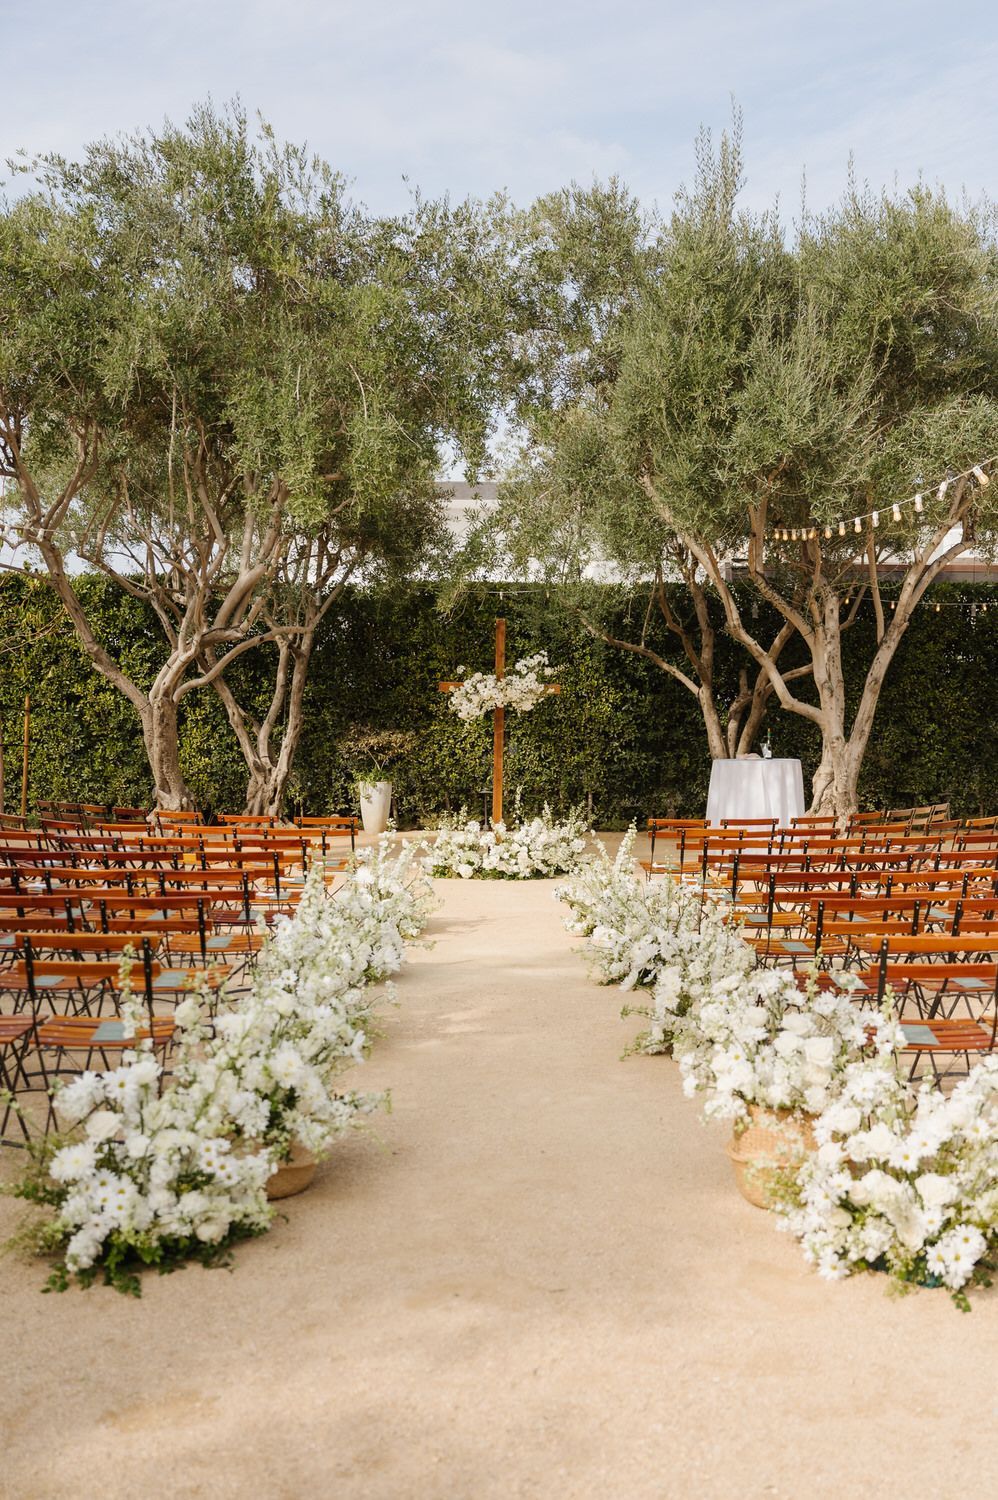 A row of wooden chairs lined up along a aisle decorated with white flowers.